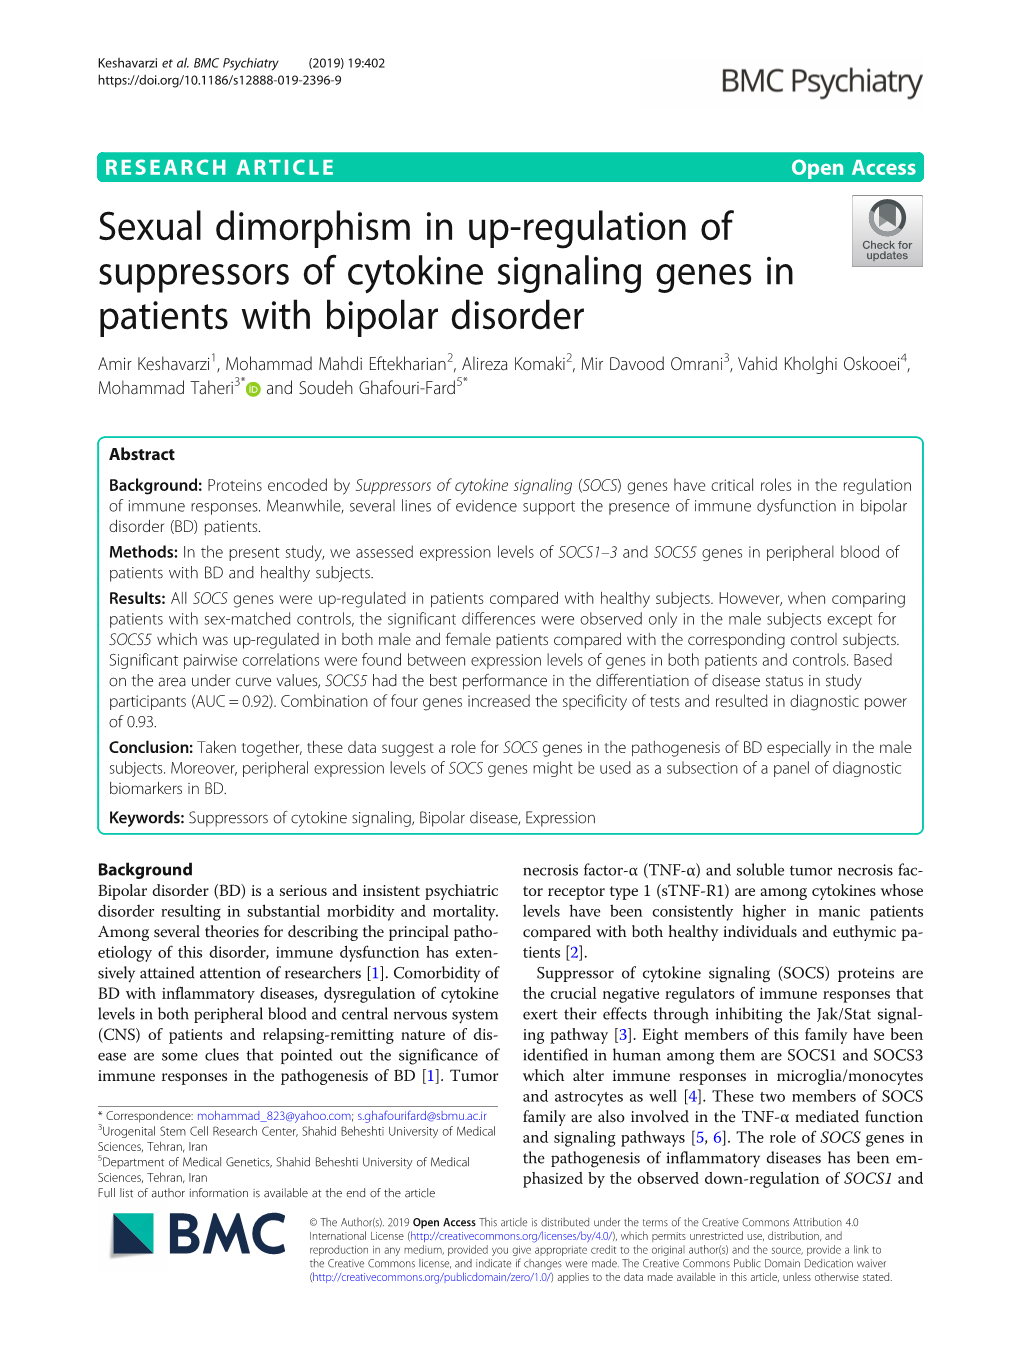 Sexual Dimorphism in Up-Regulation of Suppressors of Cytokine Signaling